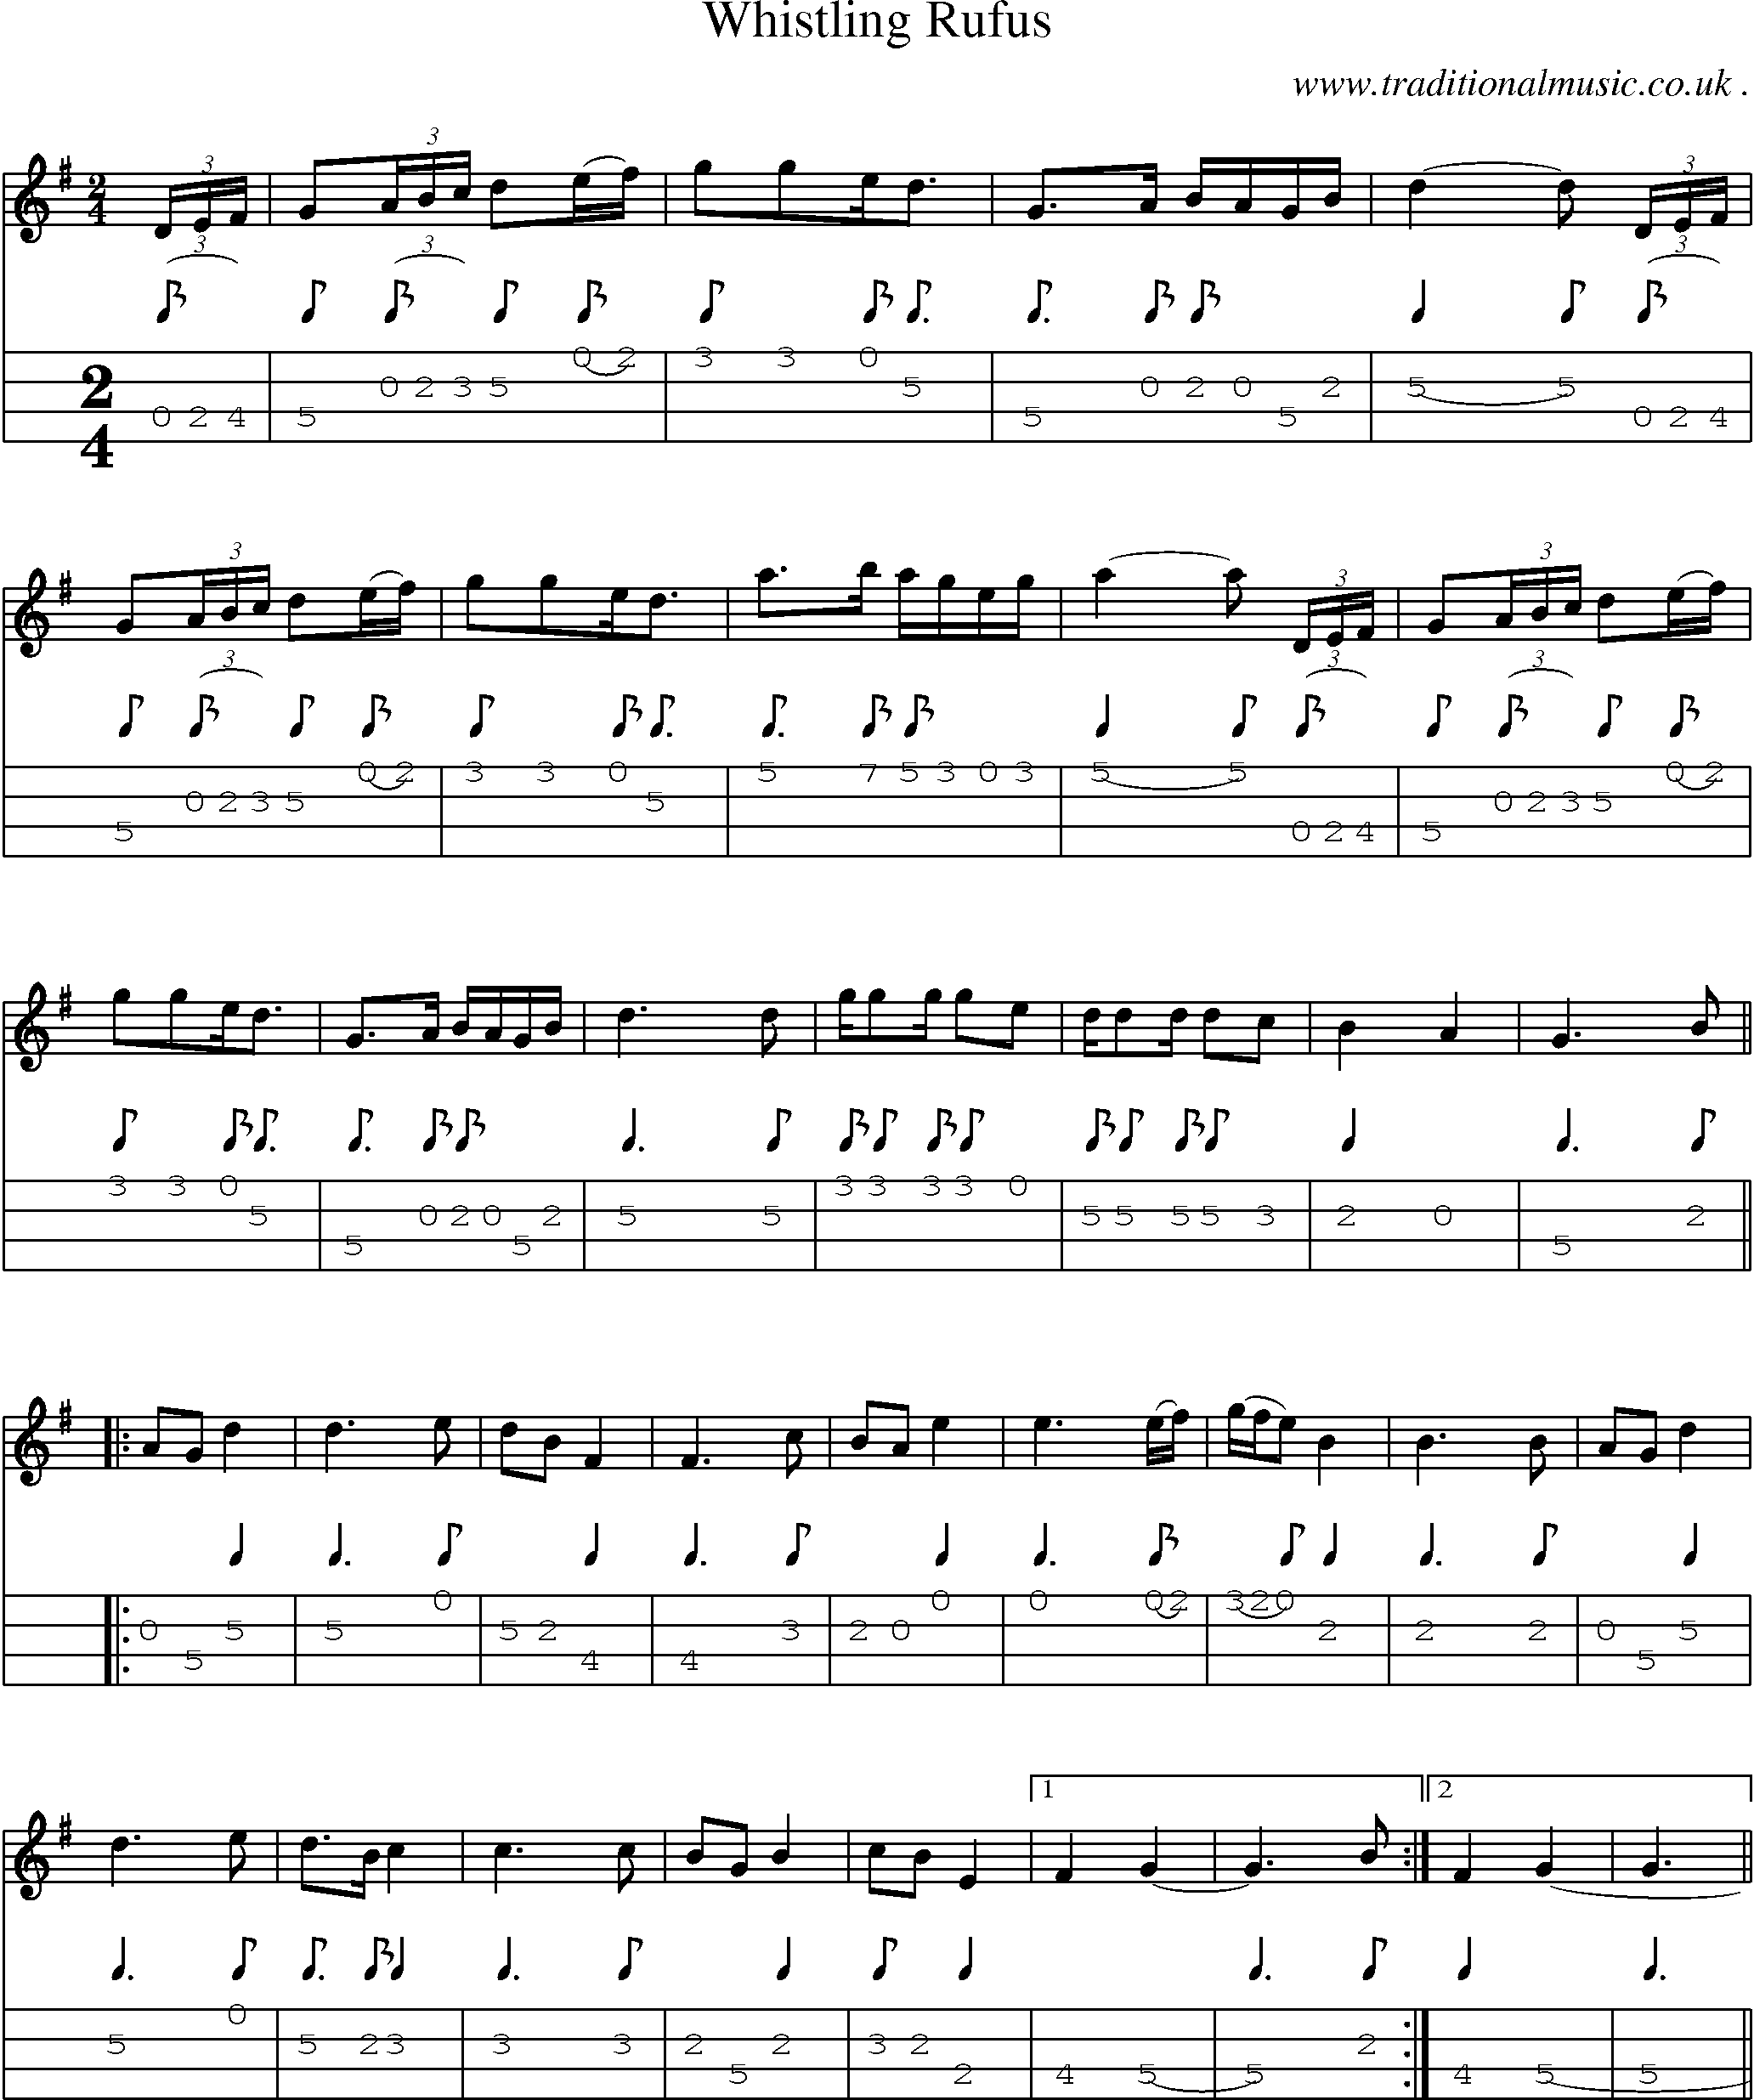 Sheet-music  score, Chords and Mandolin Tabs for Whistling Rufus